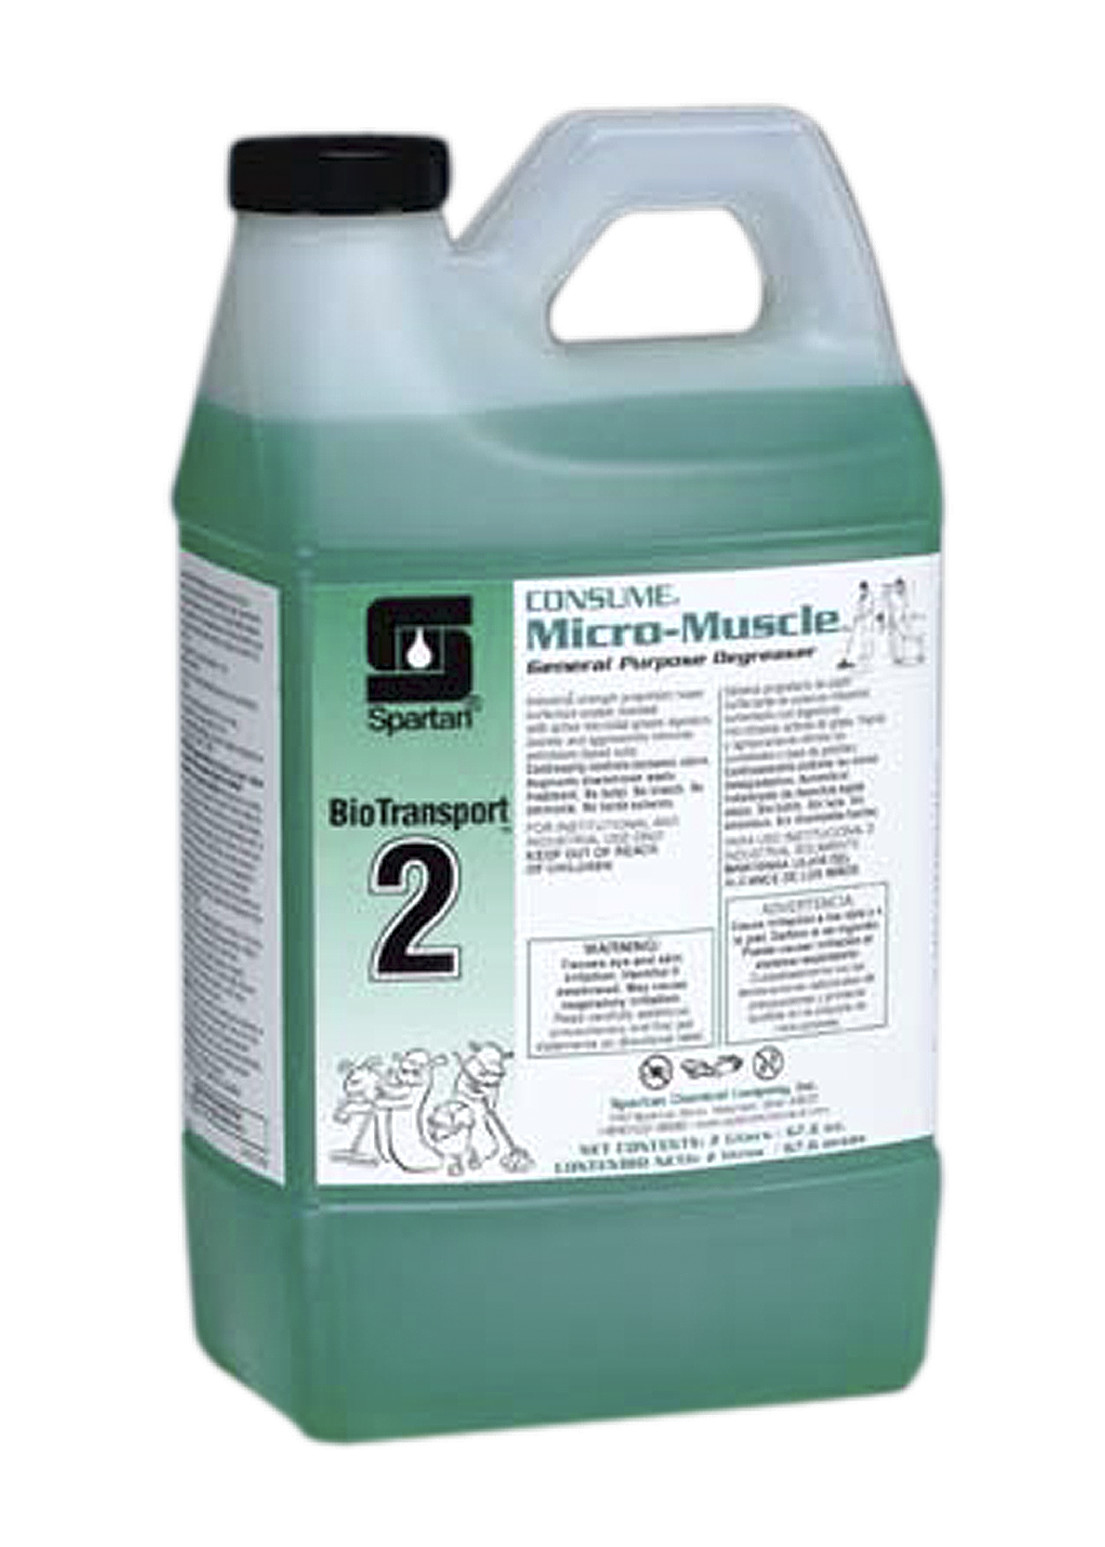 Spartan Chemical Company BioTransport 2 Consume Micro-Muscle, 2 LITER 4/CS